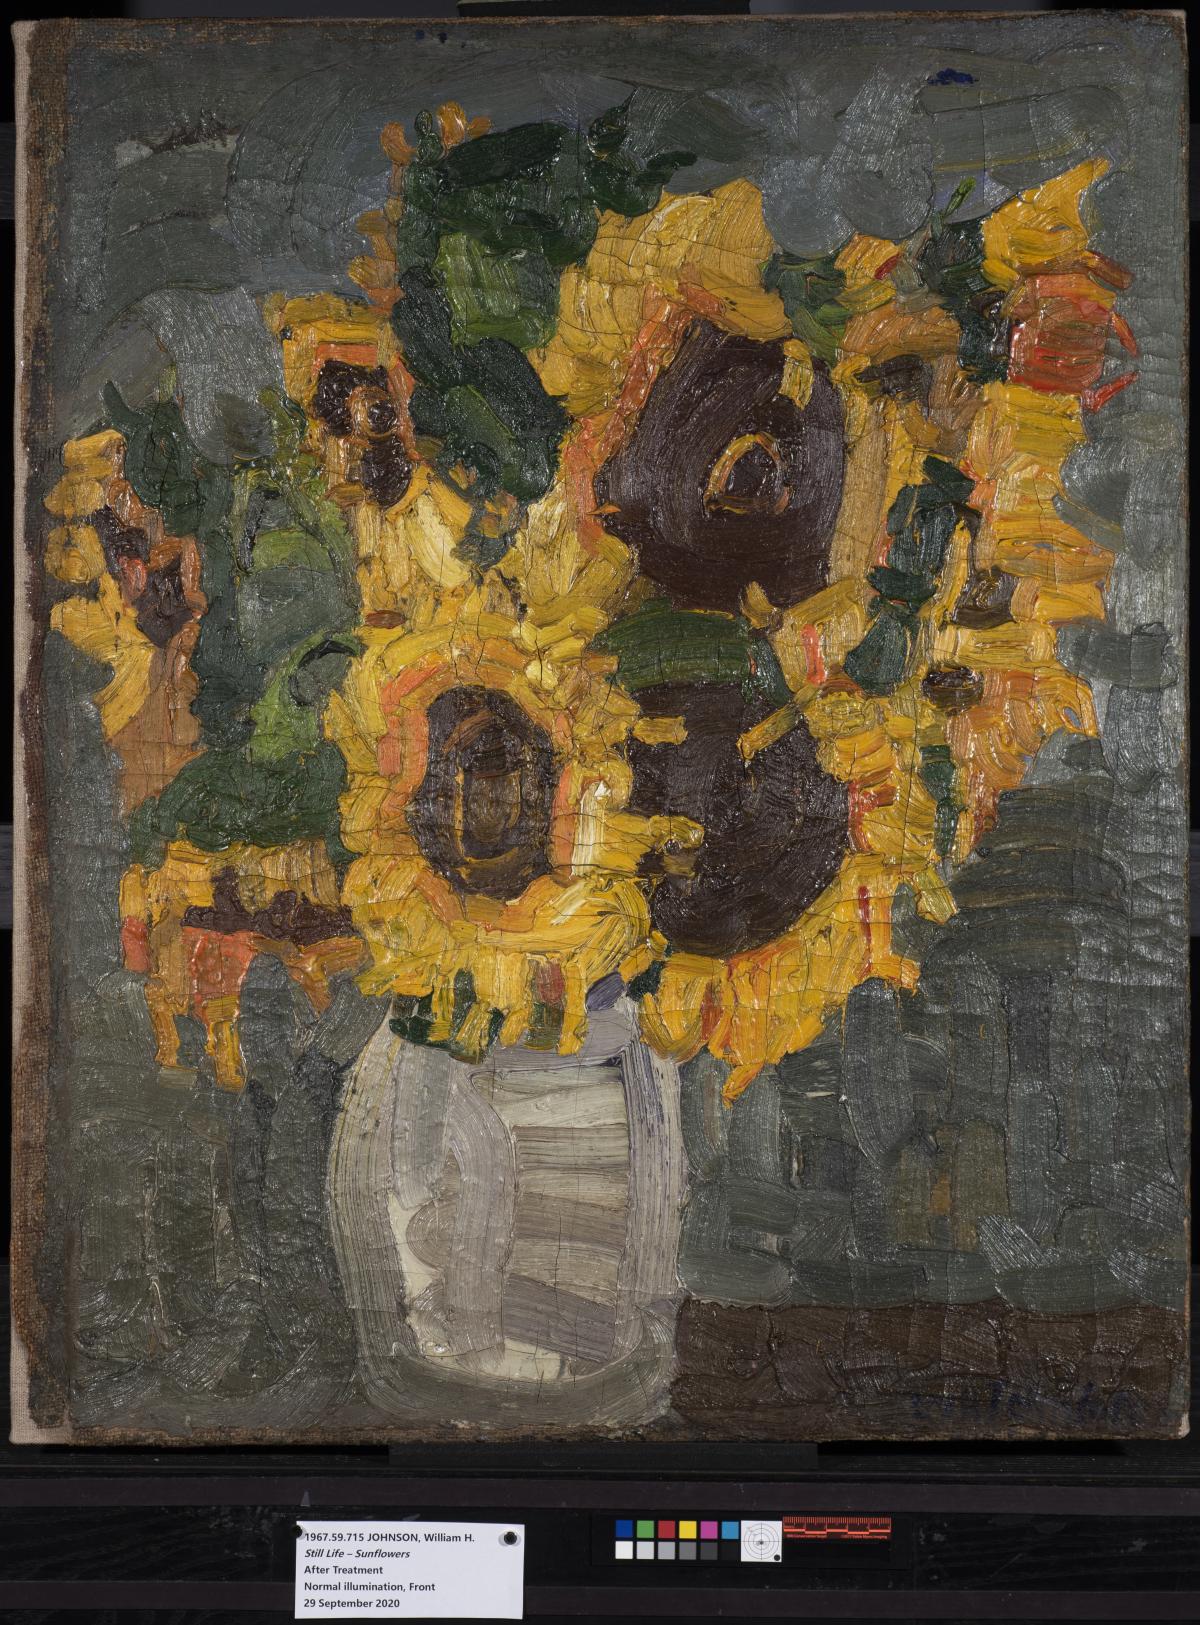 A painting of a vase of yellow sunflowers that has undergone conservation treatment